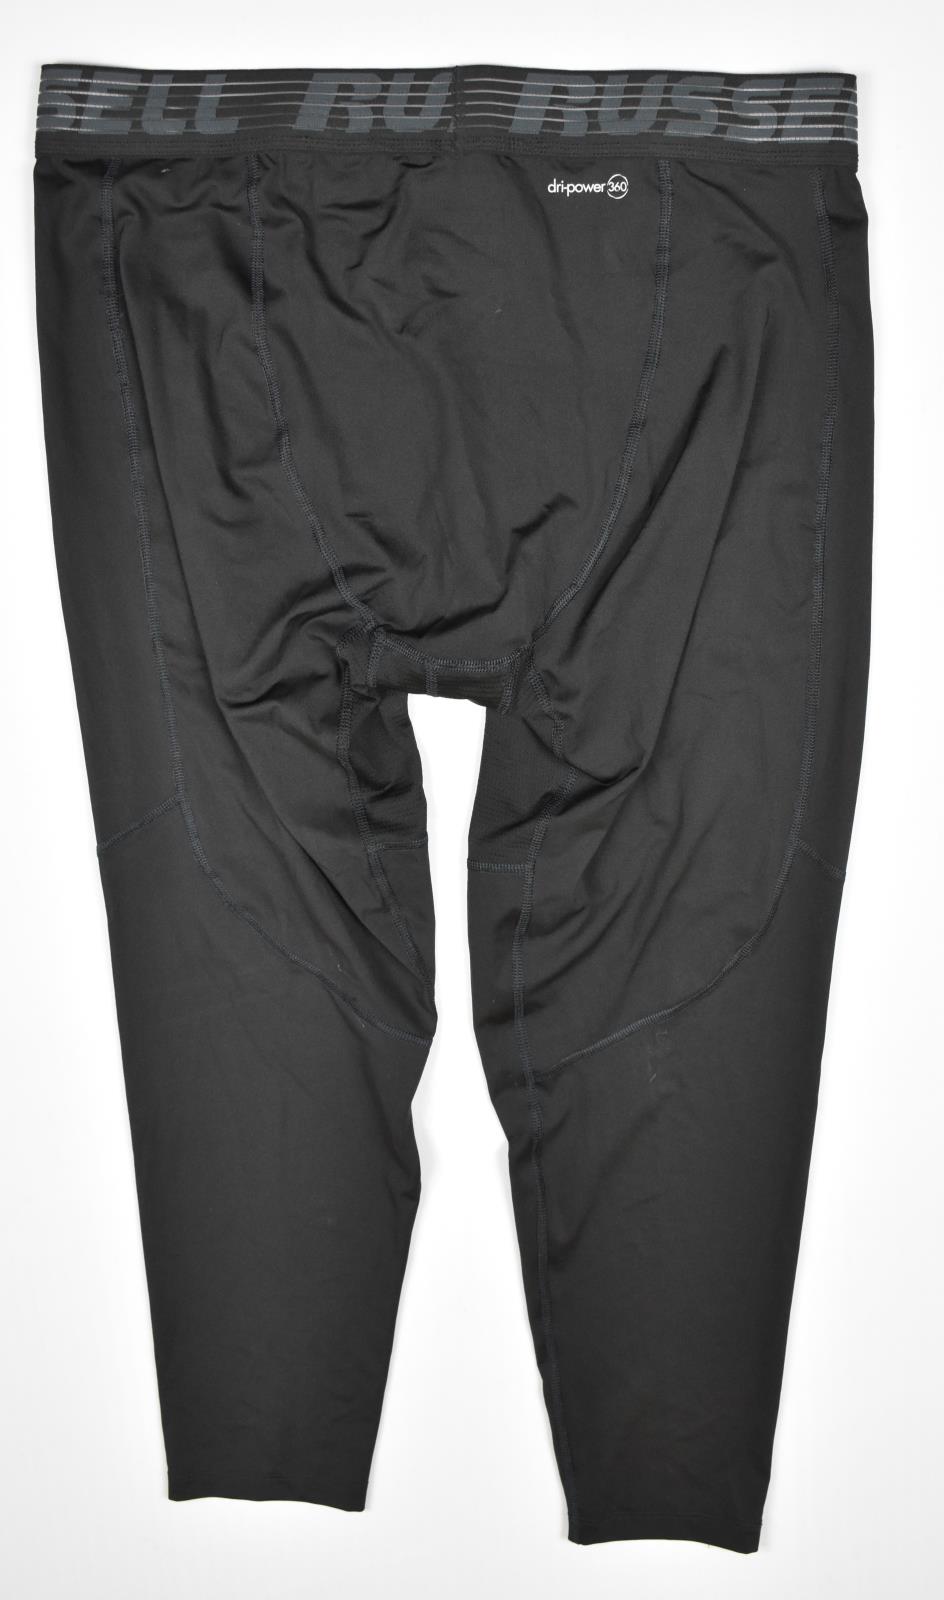 Russell Dri Power 360 Mens Active Tights Pants Size 2XL New BLM4-46 | eBay